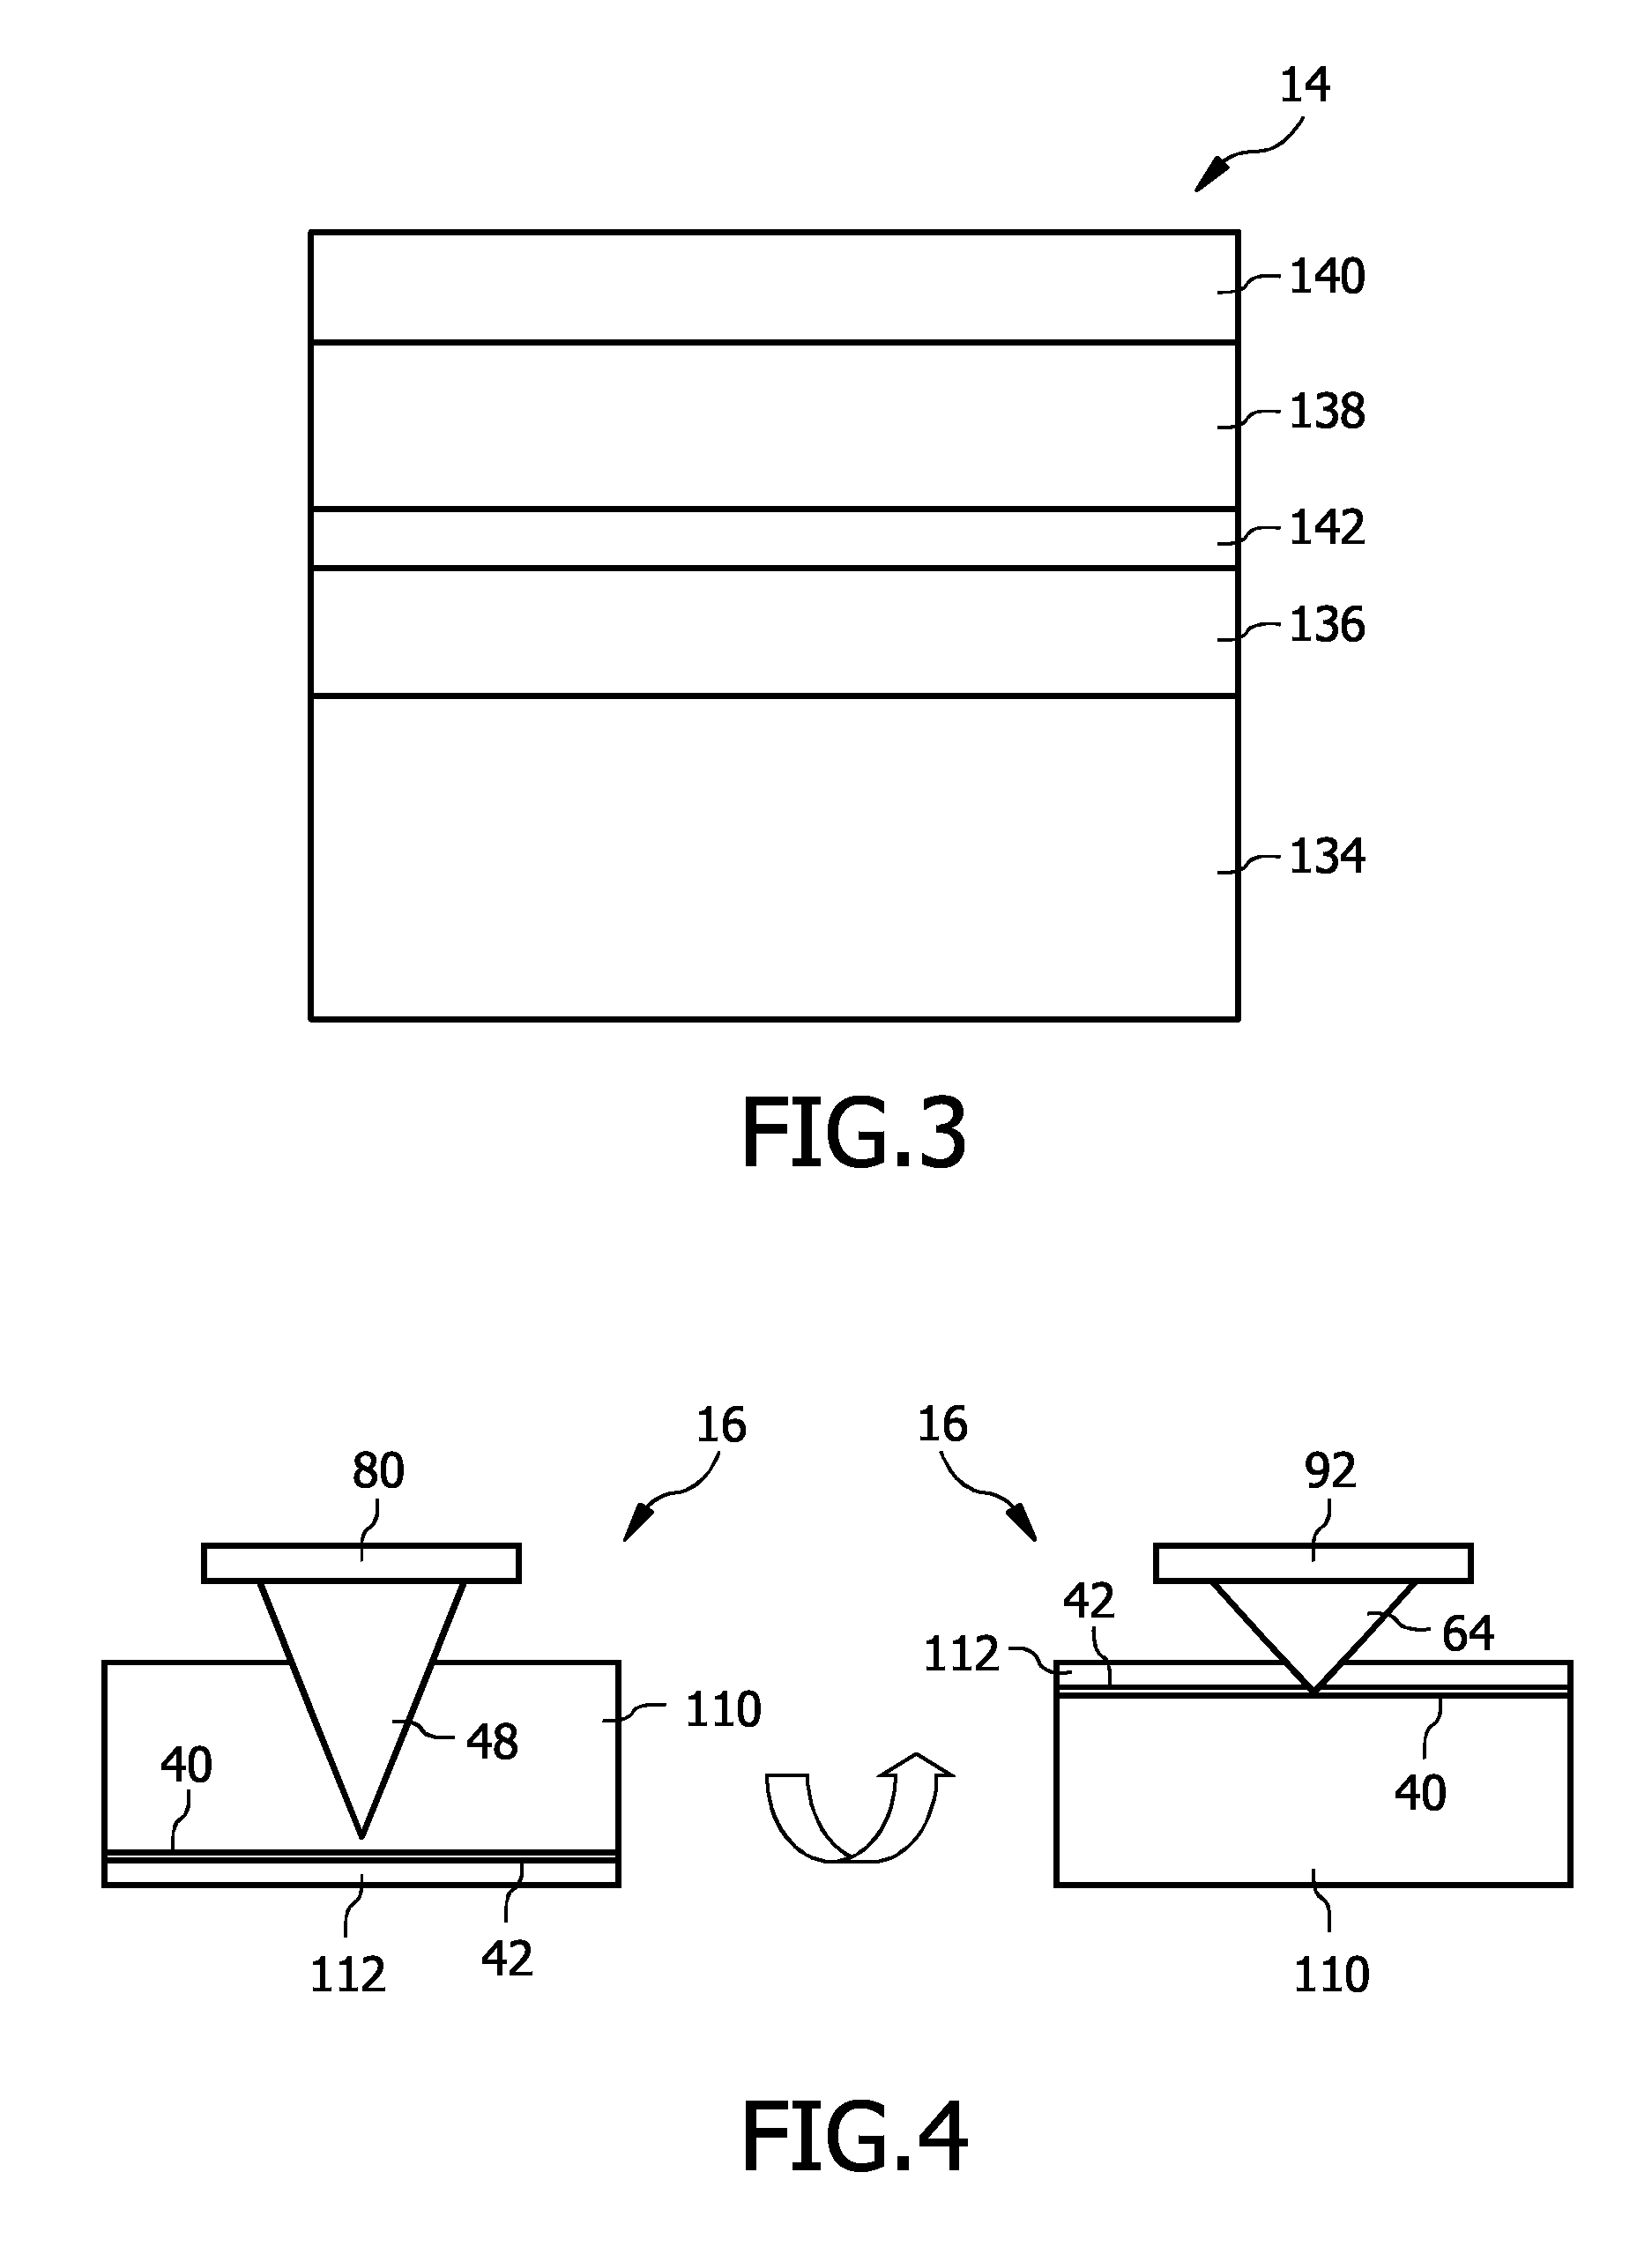 Method of Writing on an Optical Recording Medium, Optical Recording Medium, and Method of Manufacturing an Optical Recording Medium